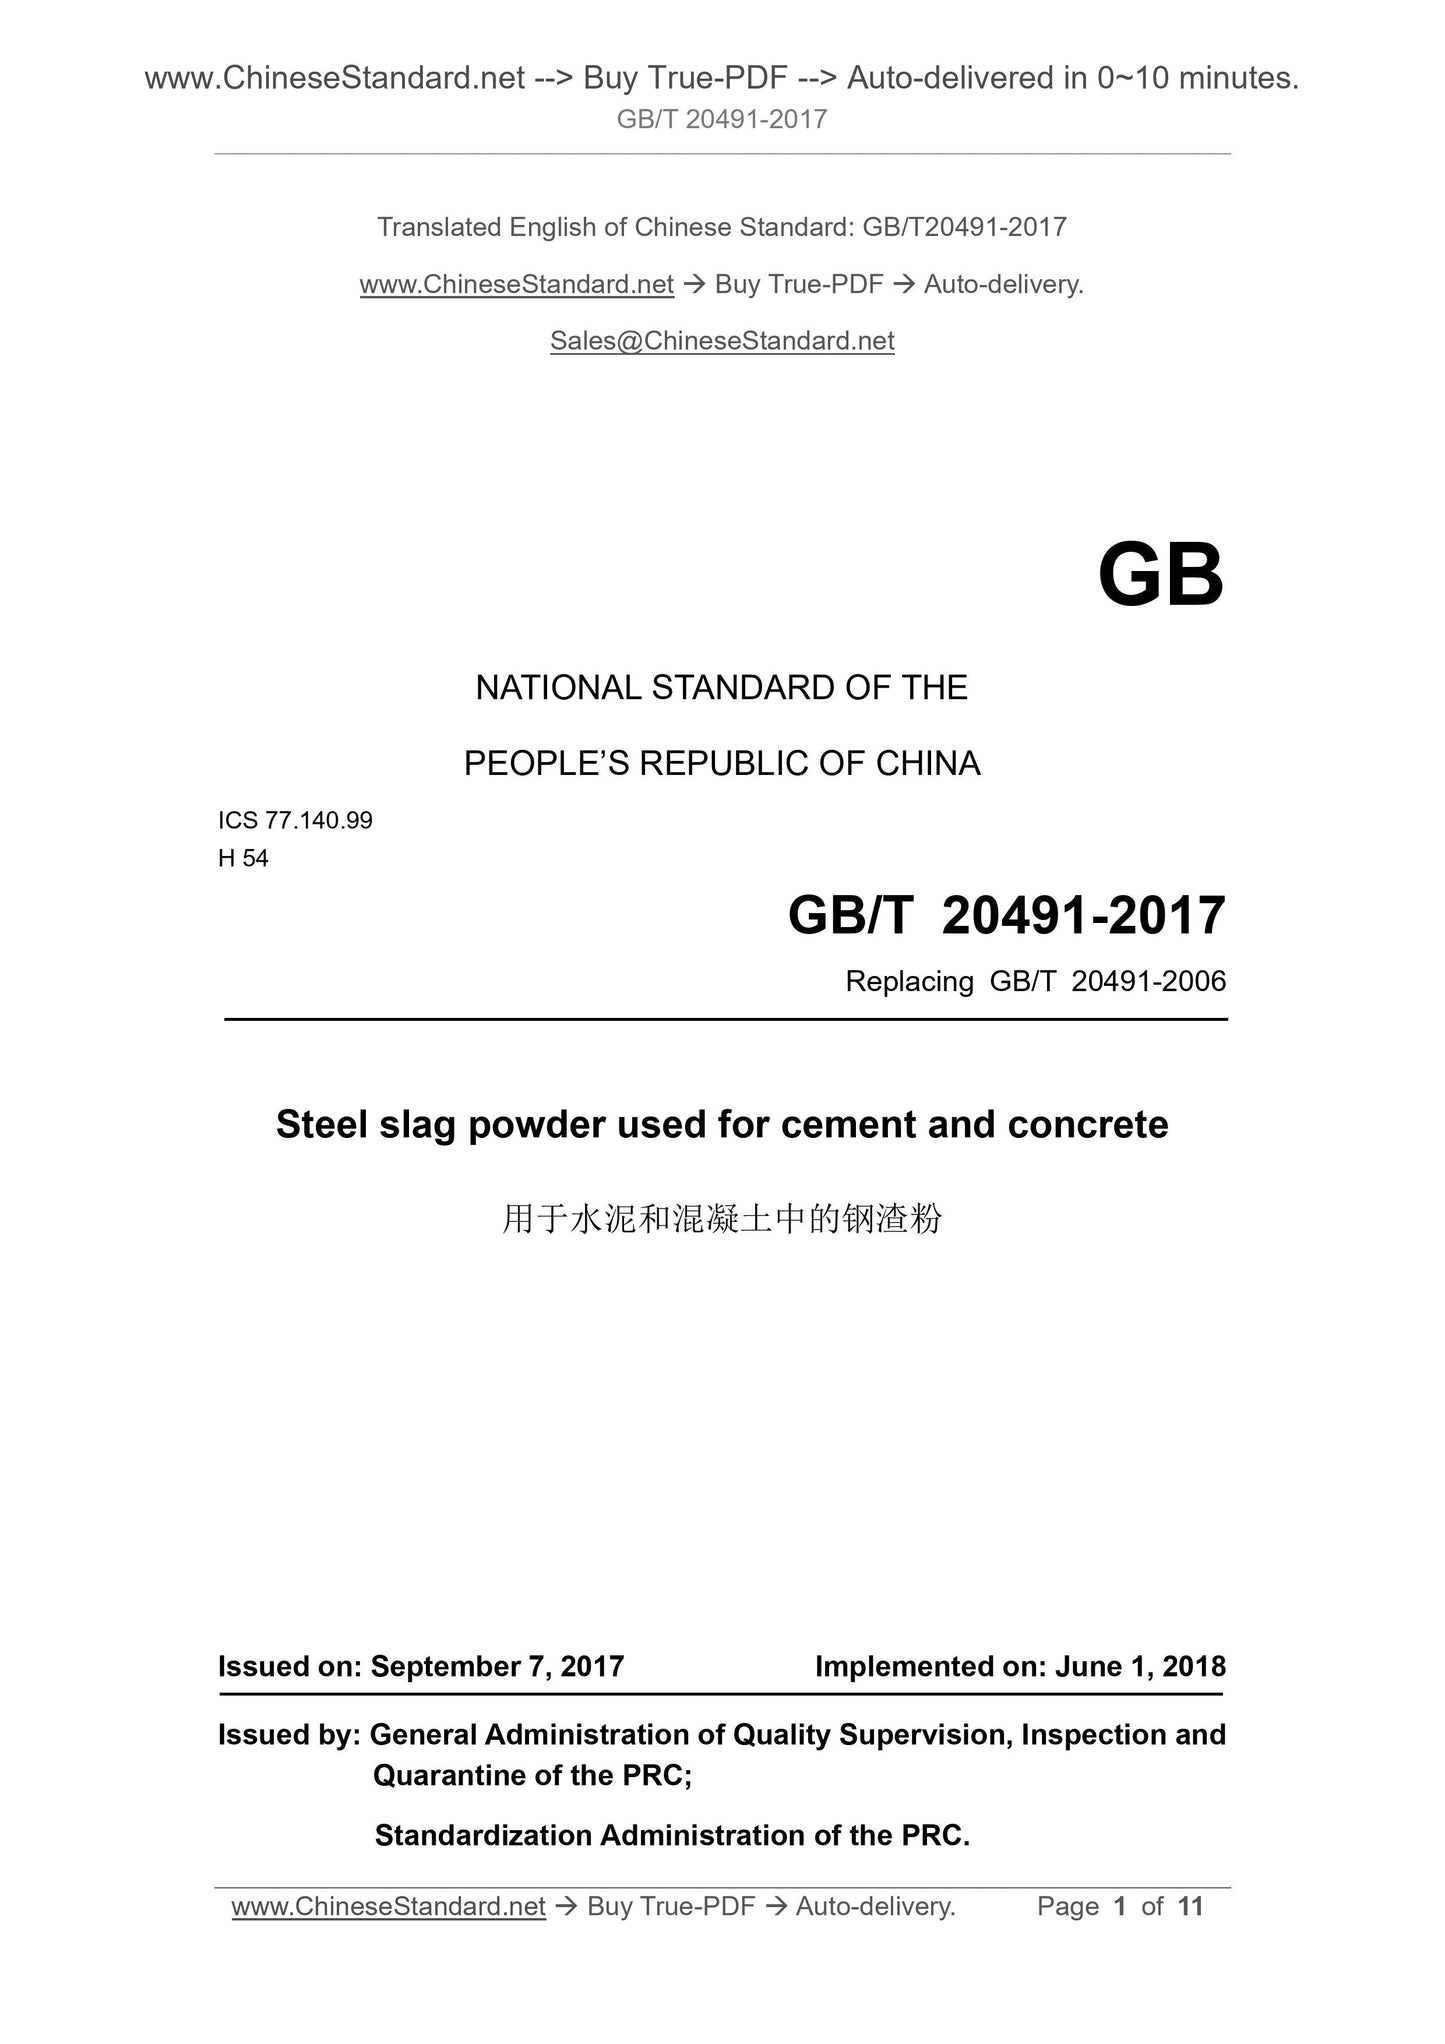 GB/T 20491-2017 Page 1